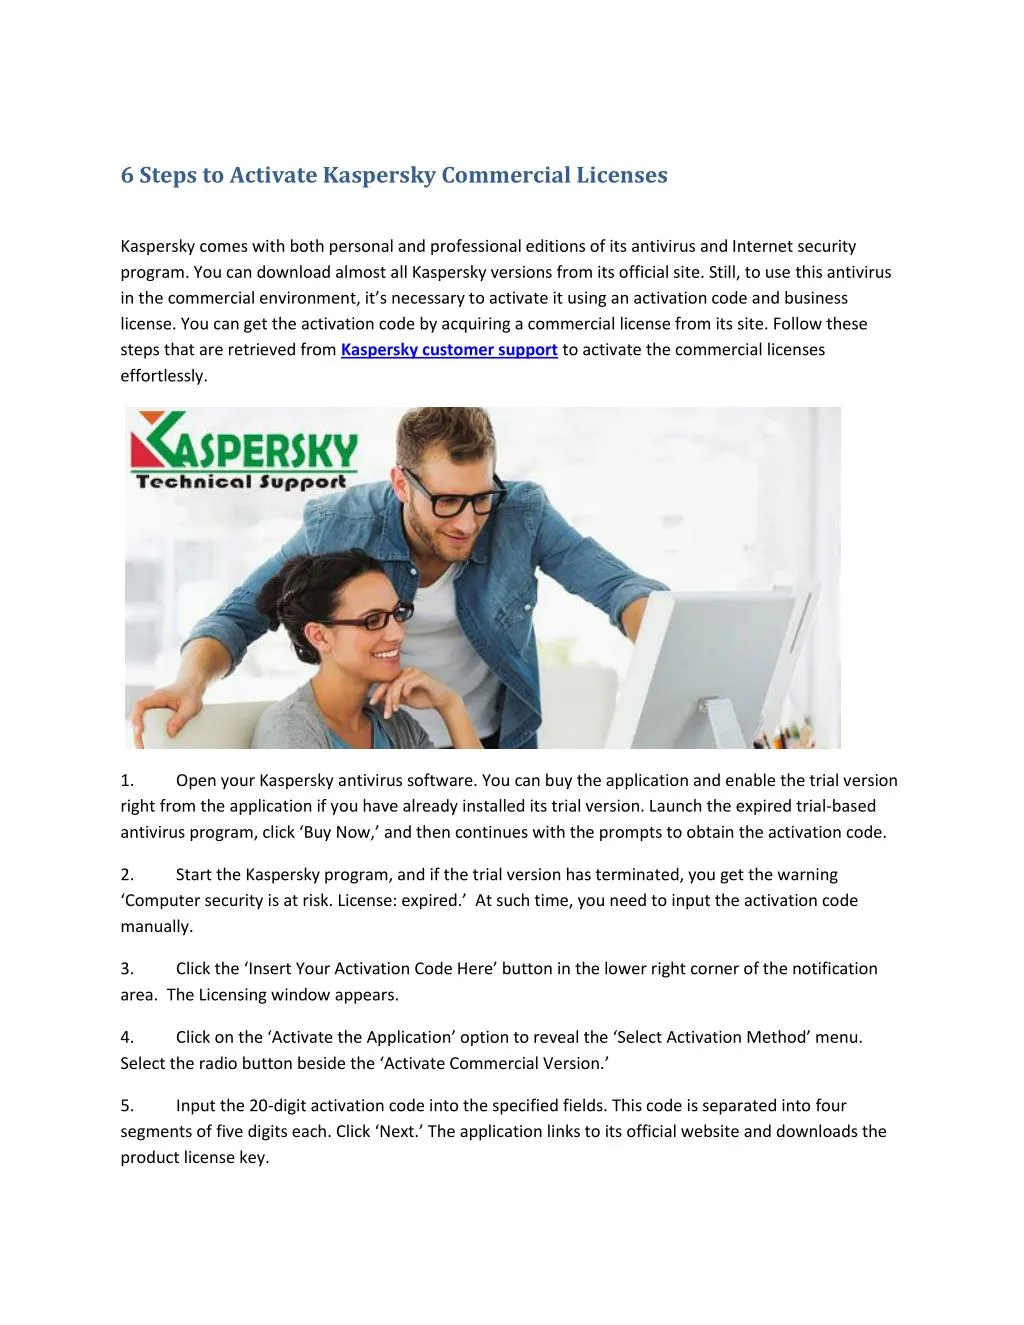 6 steps to activate kaspersky commercial licenses